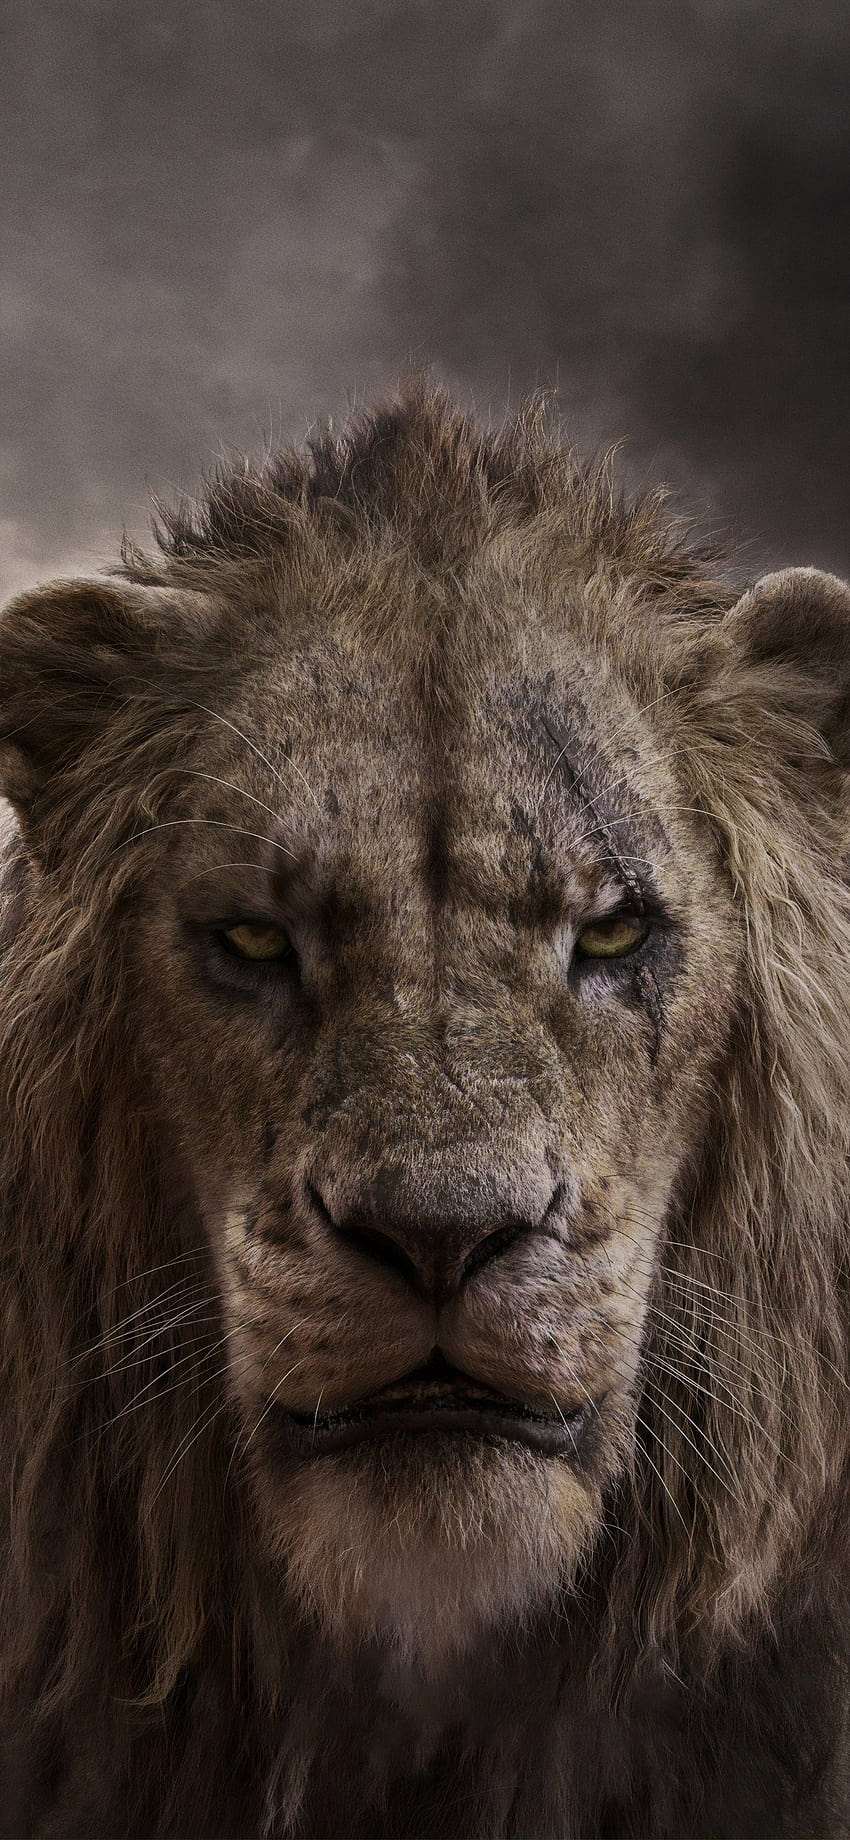 chiwetel ejiofor as scar in the lion king 2019 iPhone, lion iphone HD phone wallpaper